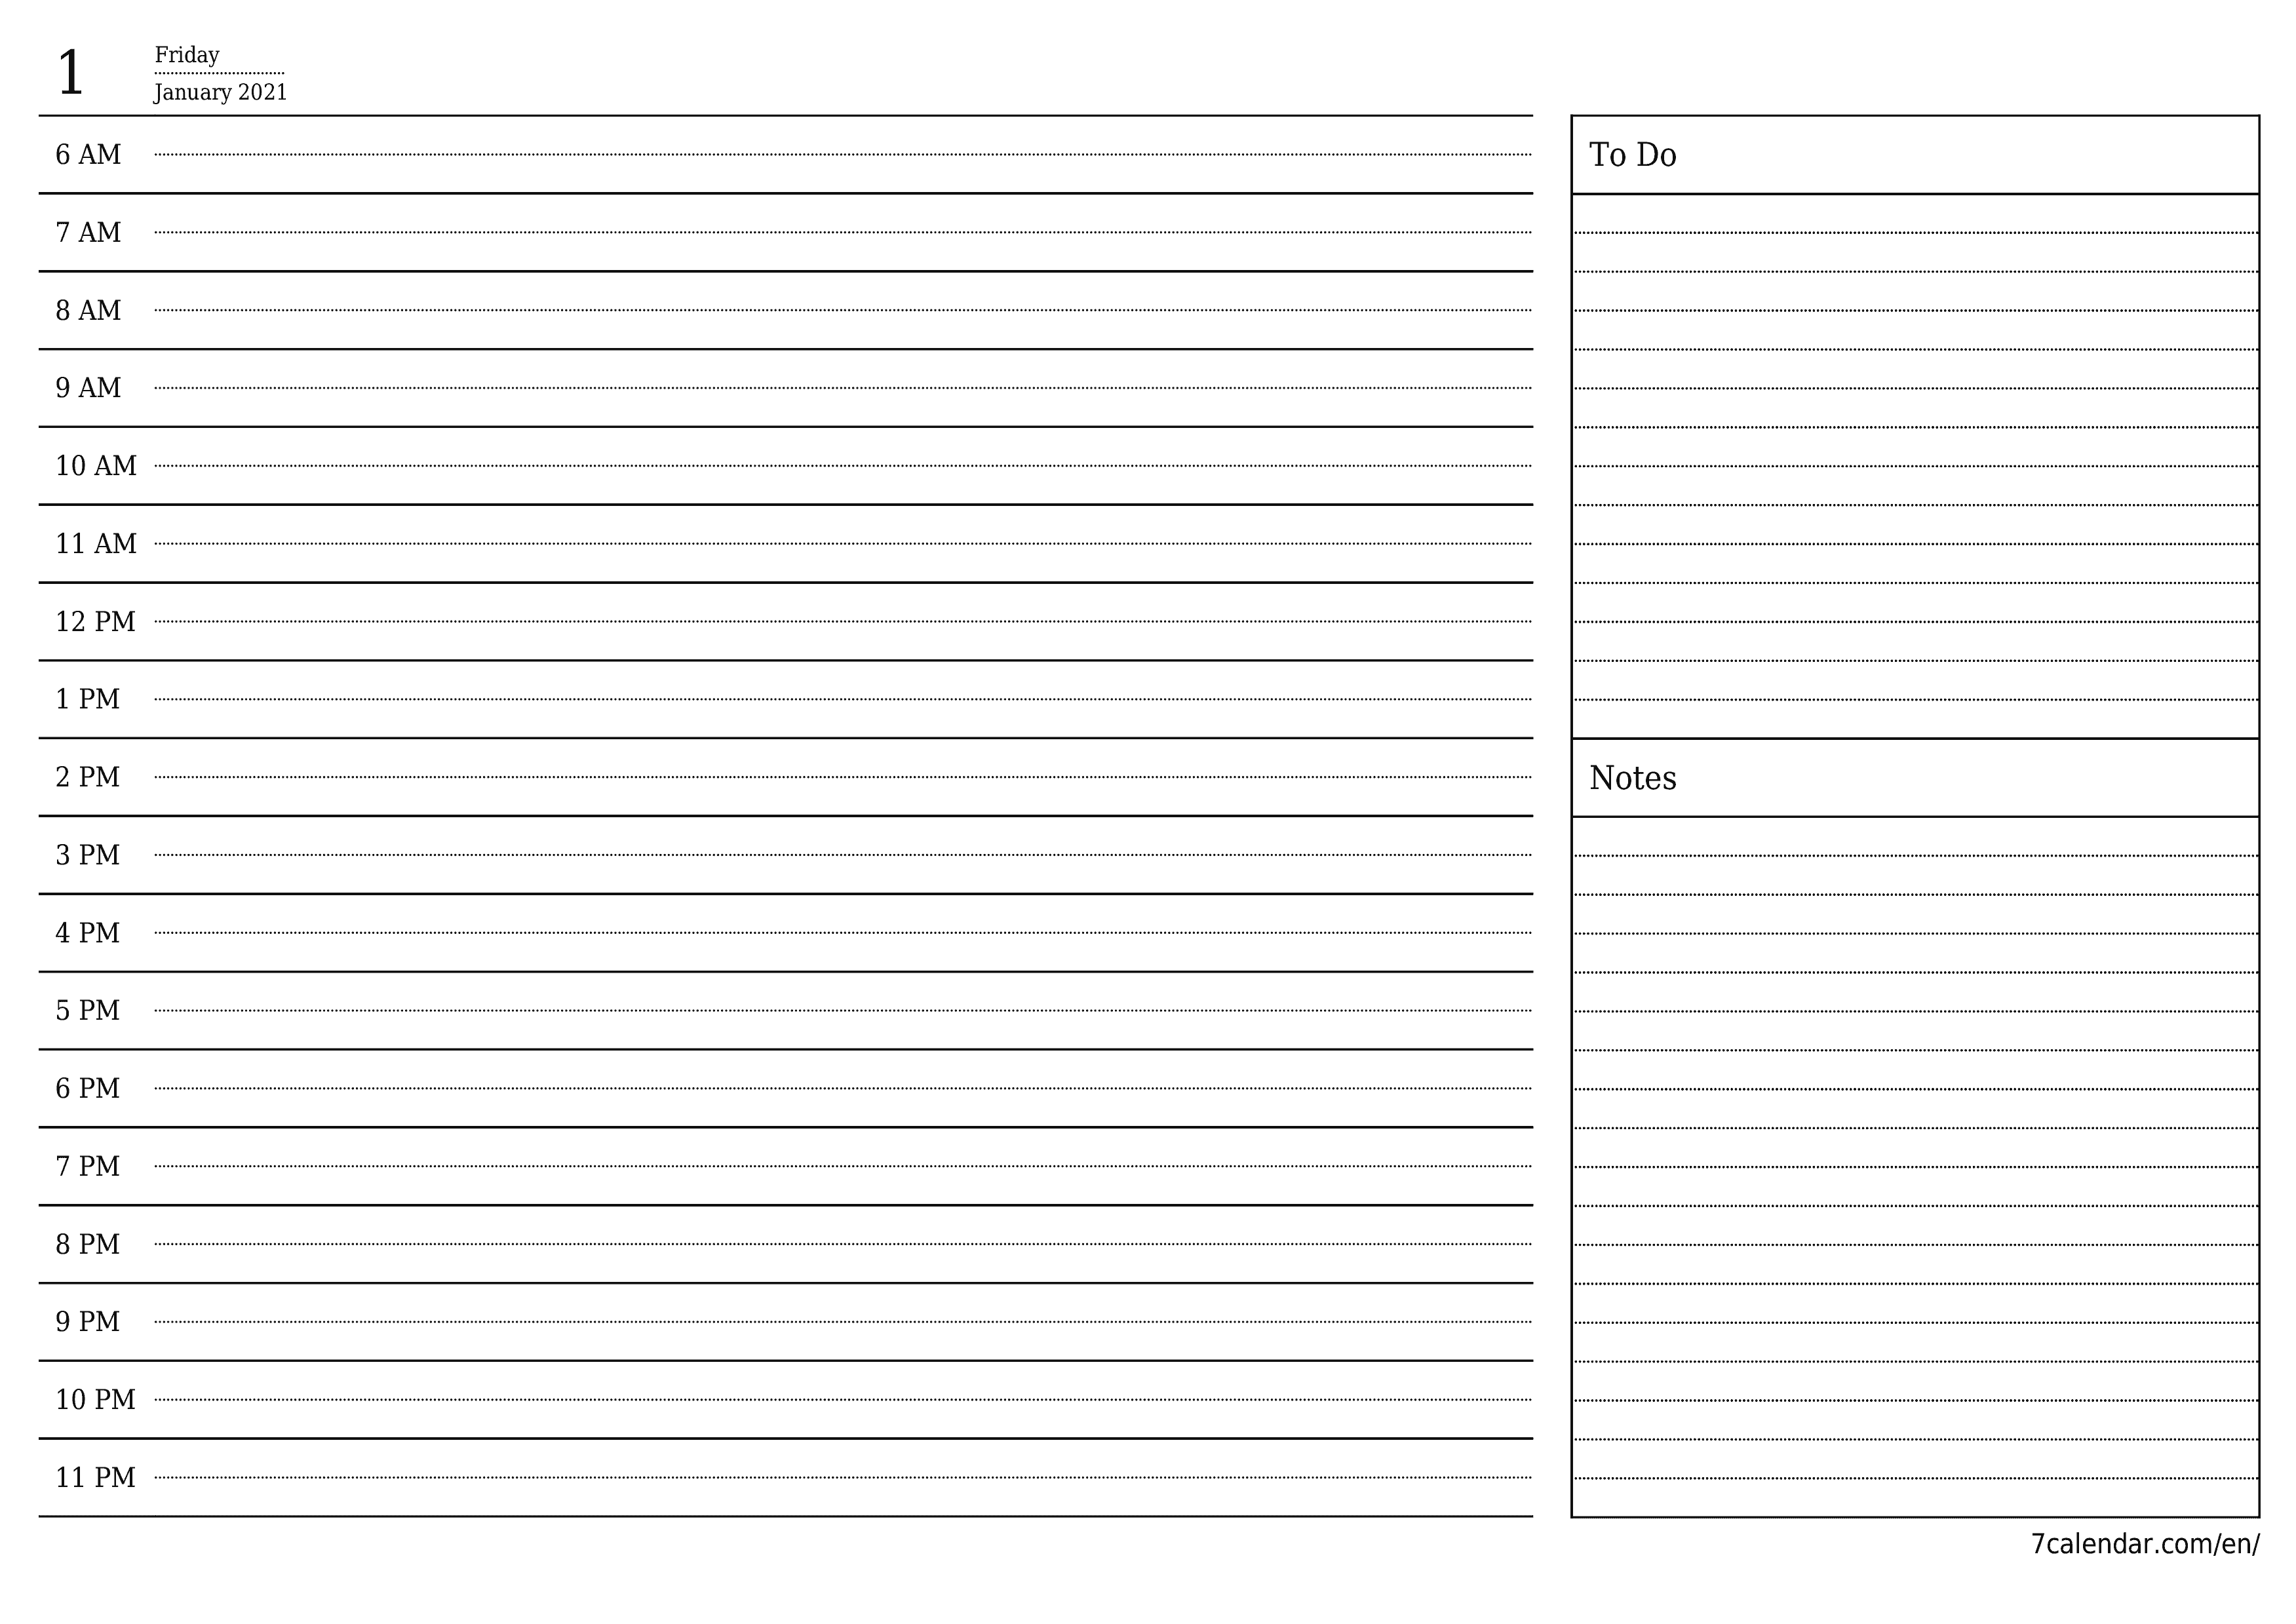 Blank daily calendar planner for day January 2021 with notes, save and print to PDF PNG English - 7calendar.com